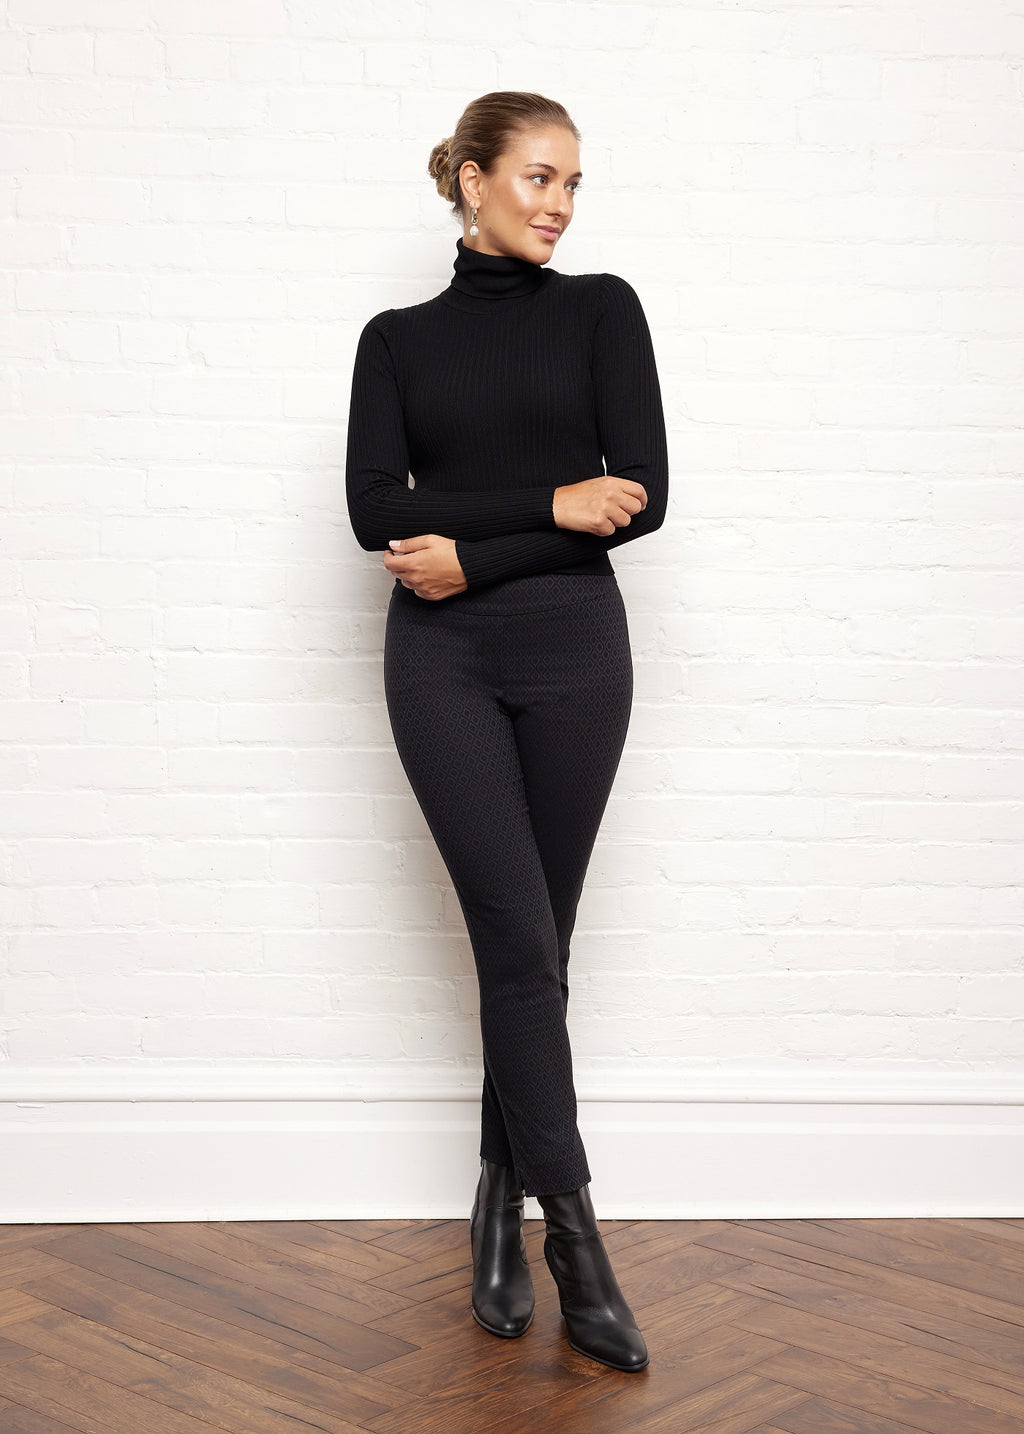 How To Choose Spanx Control Pants - An Easy Guide To Help You